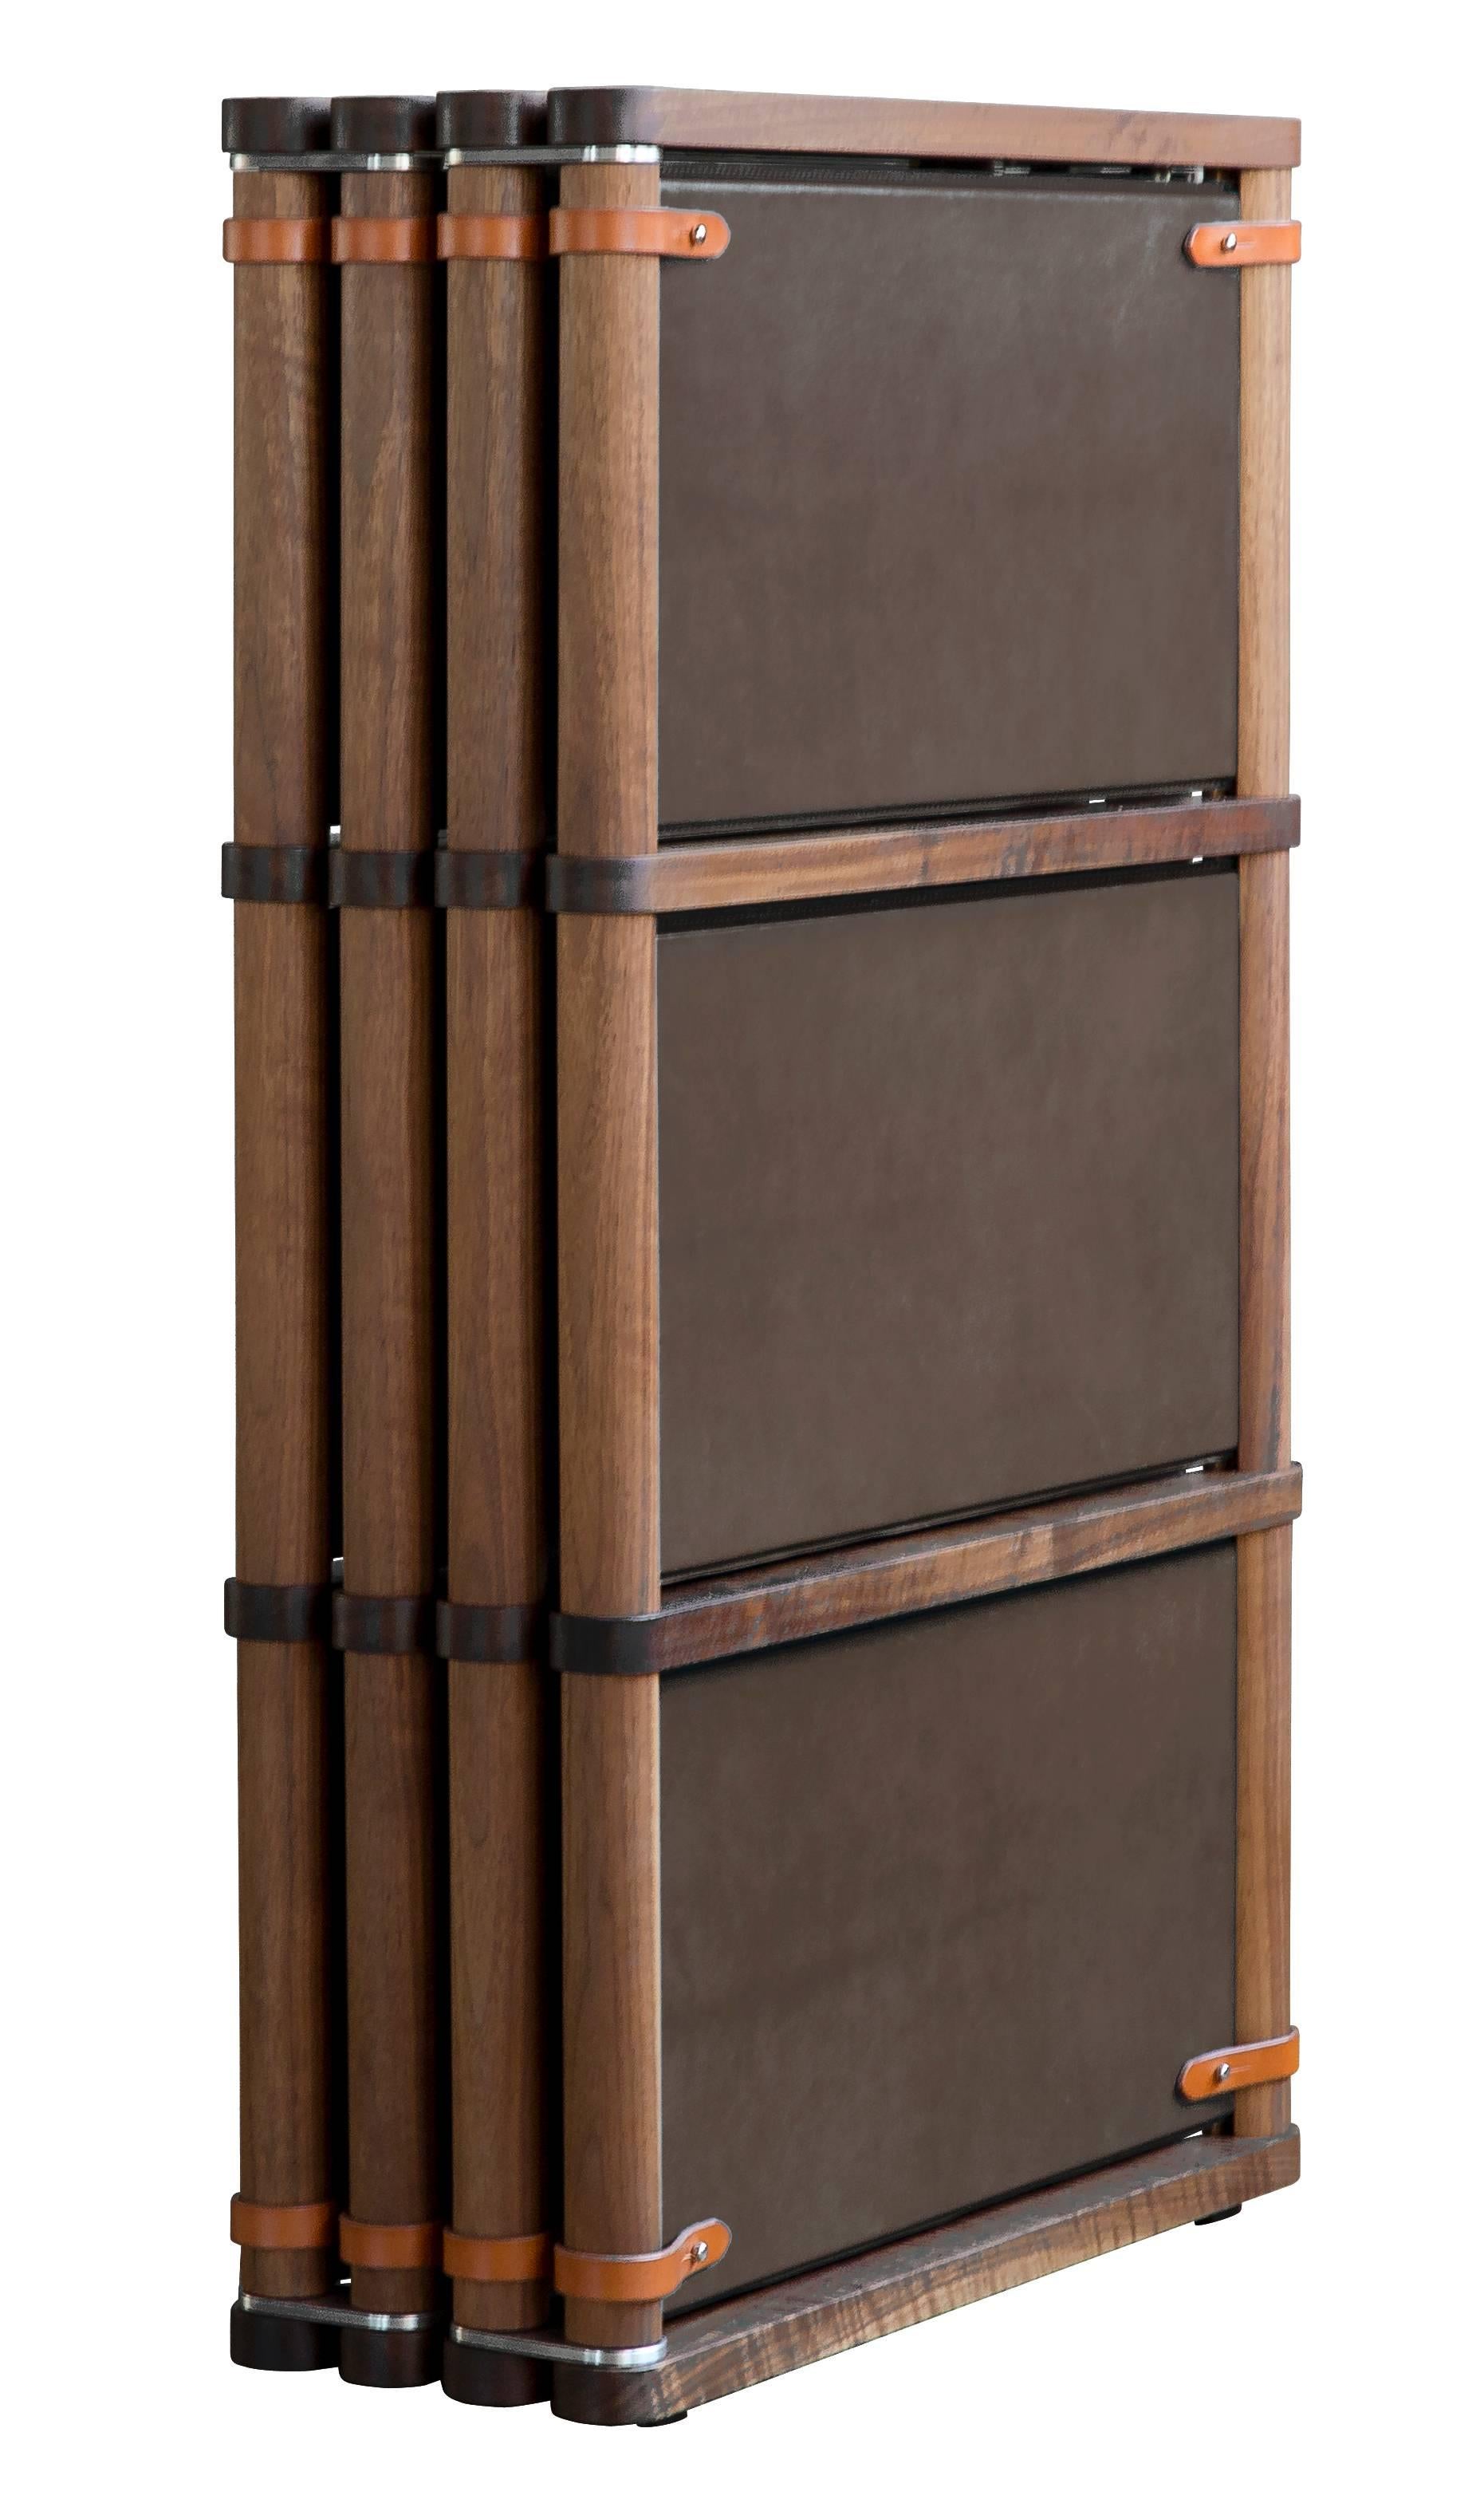 The Lambert folding screen or room divider- type 2 in oiled walnut with Moore & Giles: Valhalla / Grove leather panels and cognac English bridle leather strapping.

The lambert folding screen type 2 has aluminum hinges that allow free moment in any